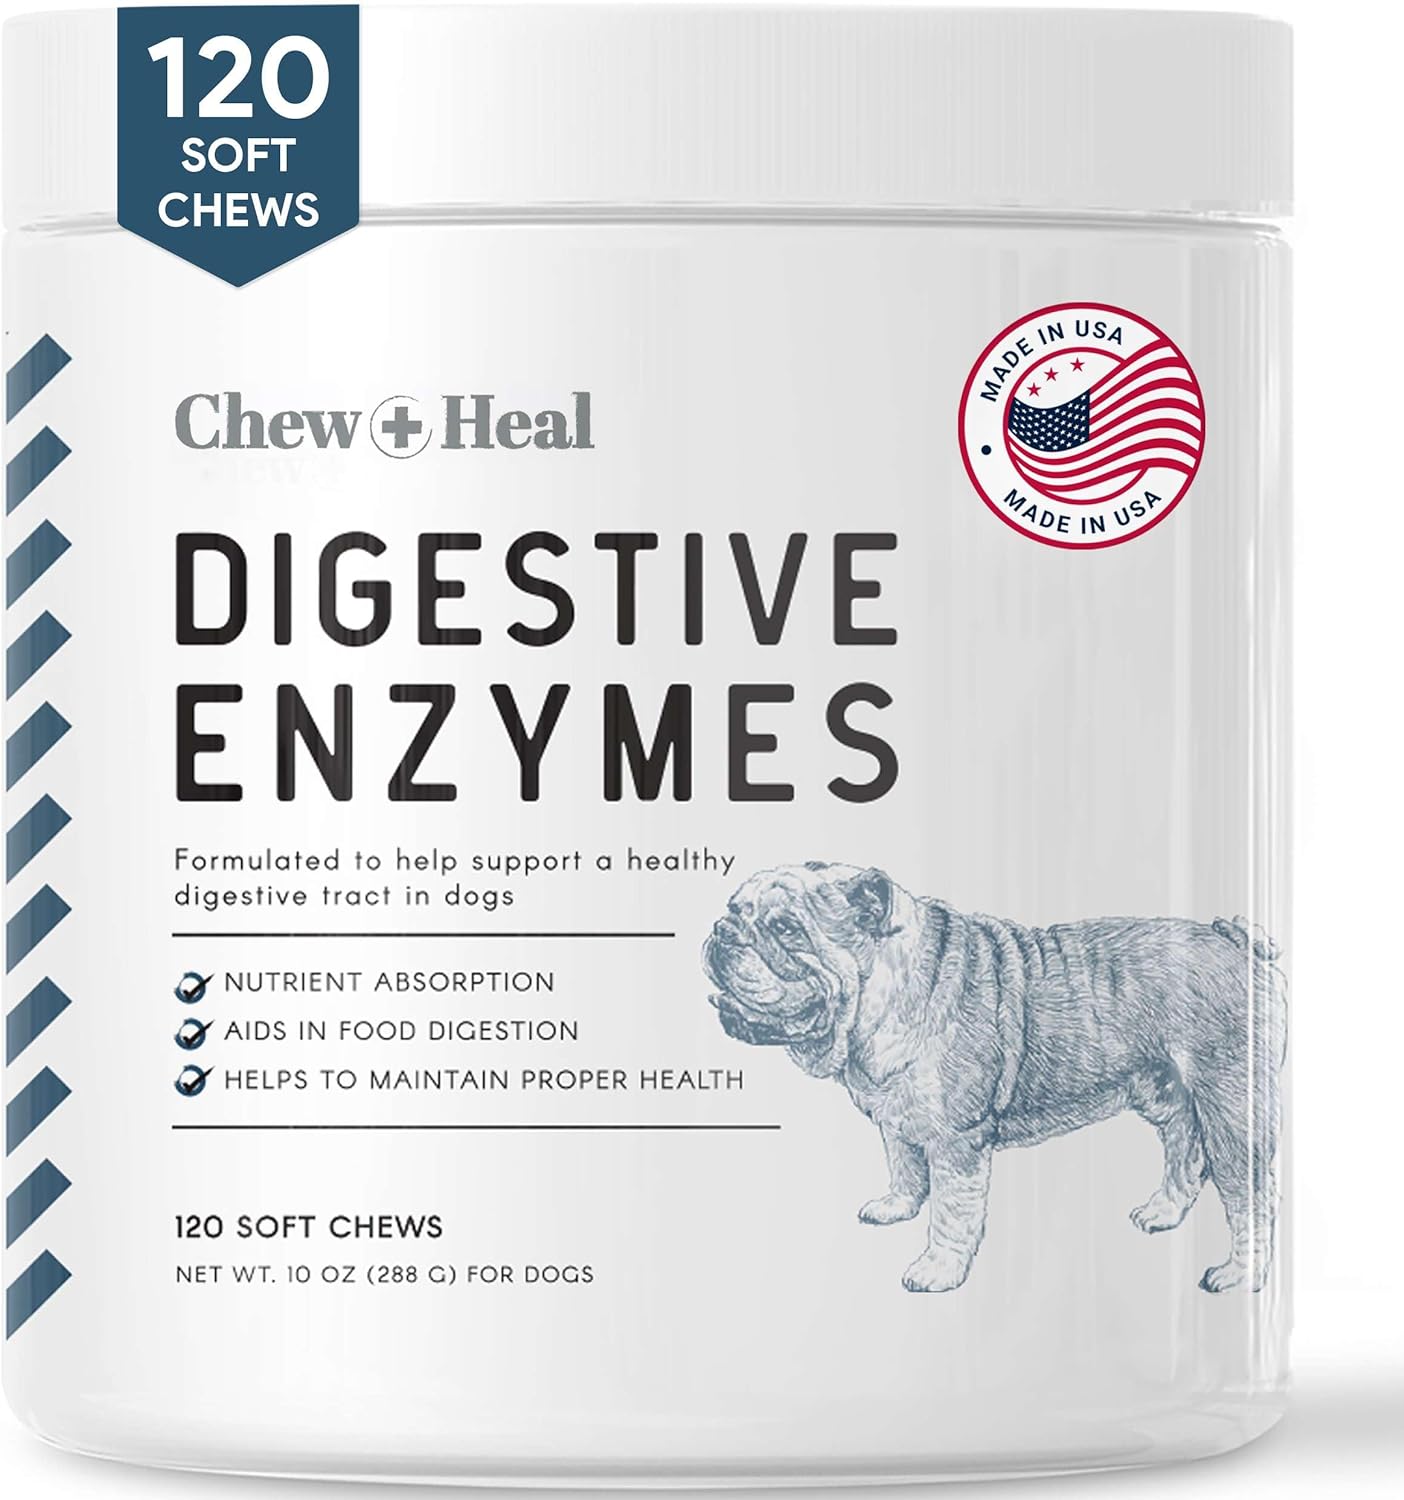 Digestive Enzymes with Probiotics for Dogs - 120 Soft Chews - Supports Healthy Digestive Tract, Helps Nutrient Absorption, Food Digestion, and Health Maintenance